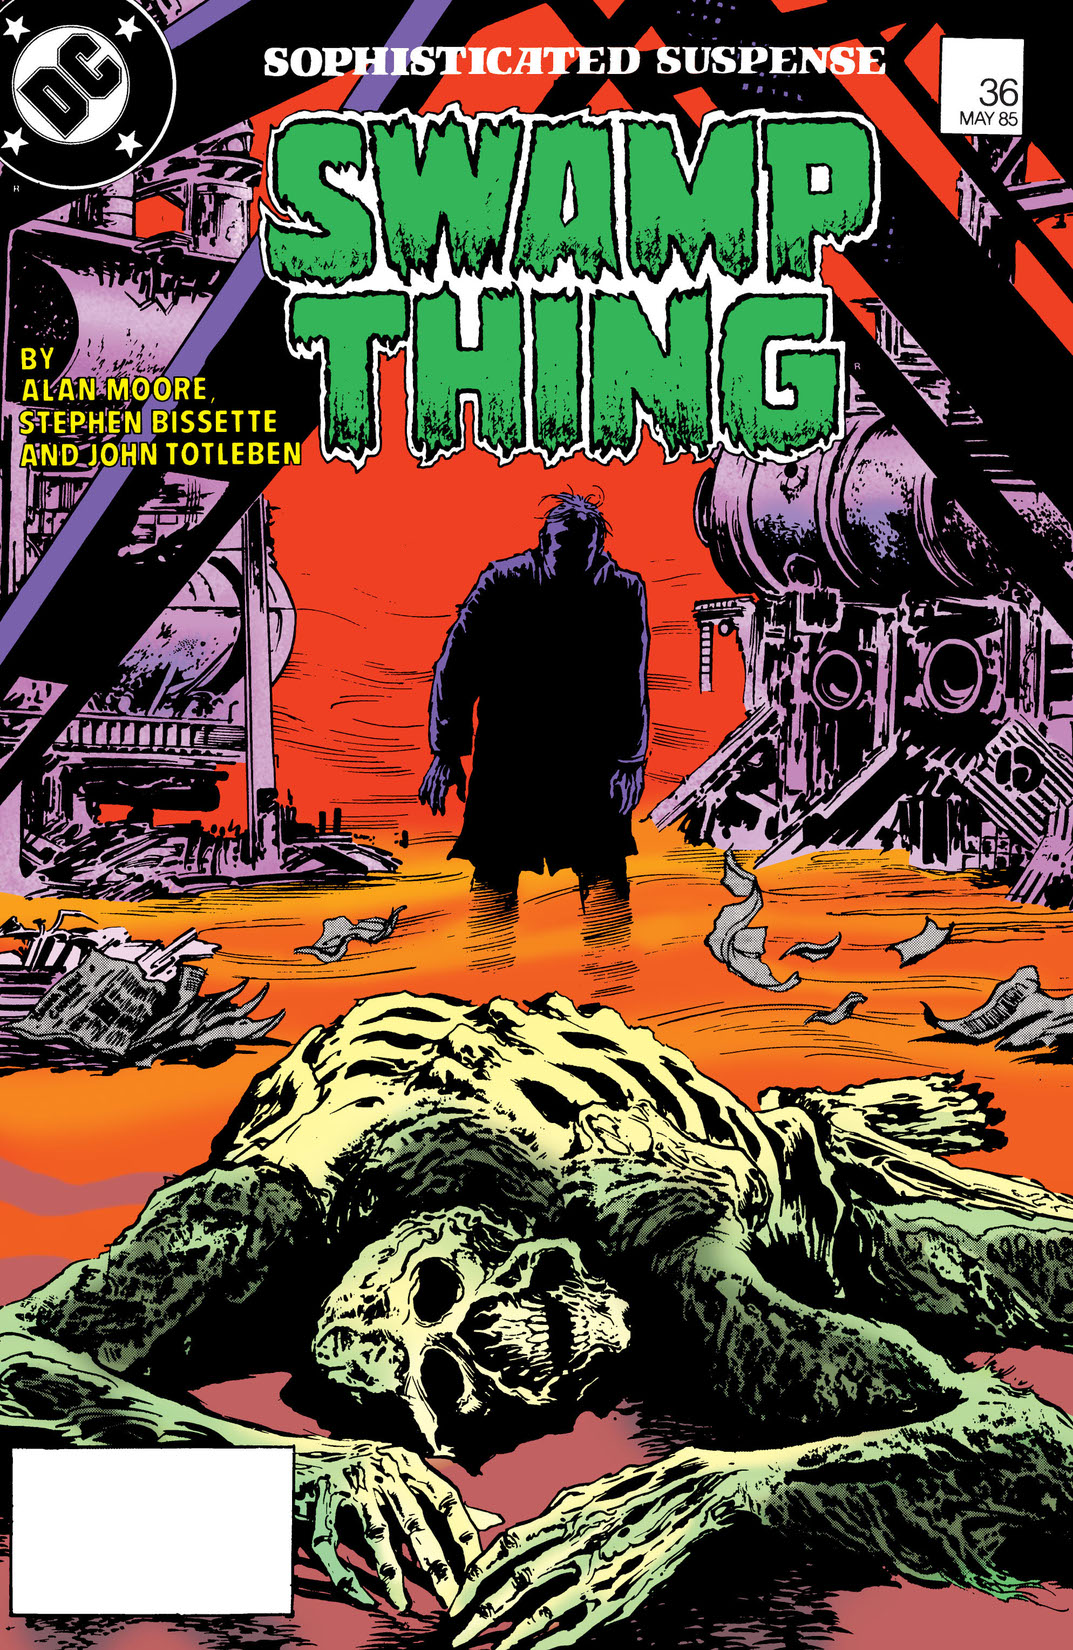 The Saga of the Swamp Thing (1982-) #36 preview images